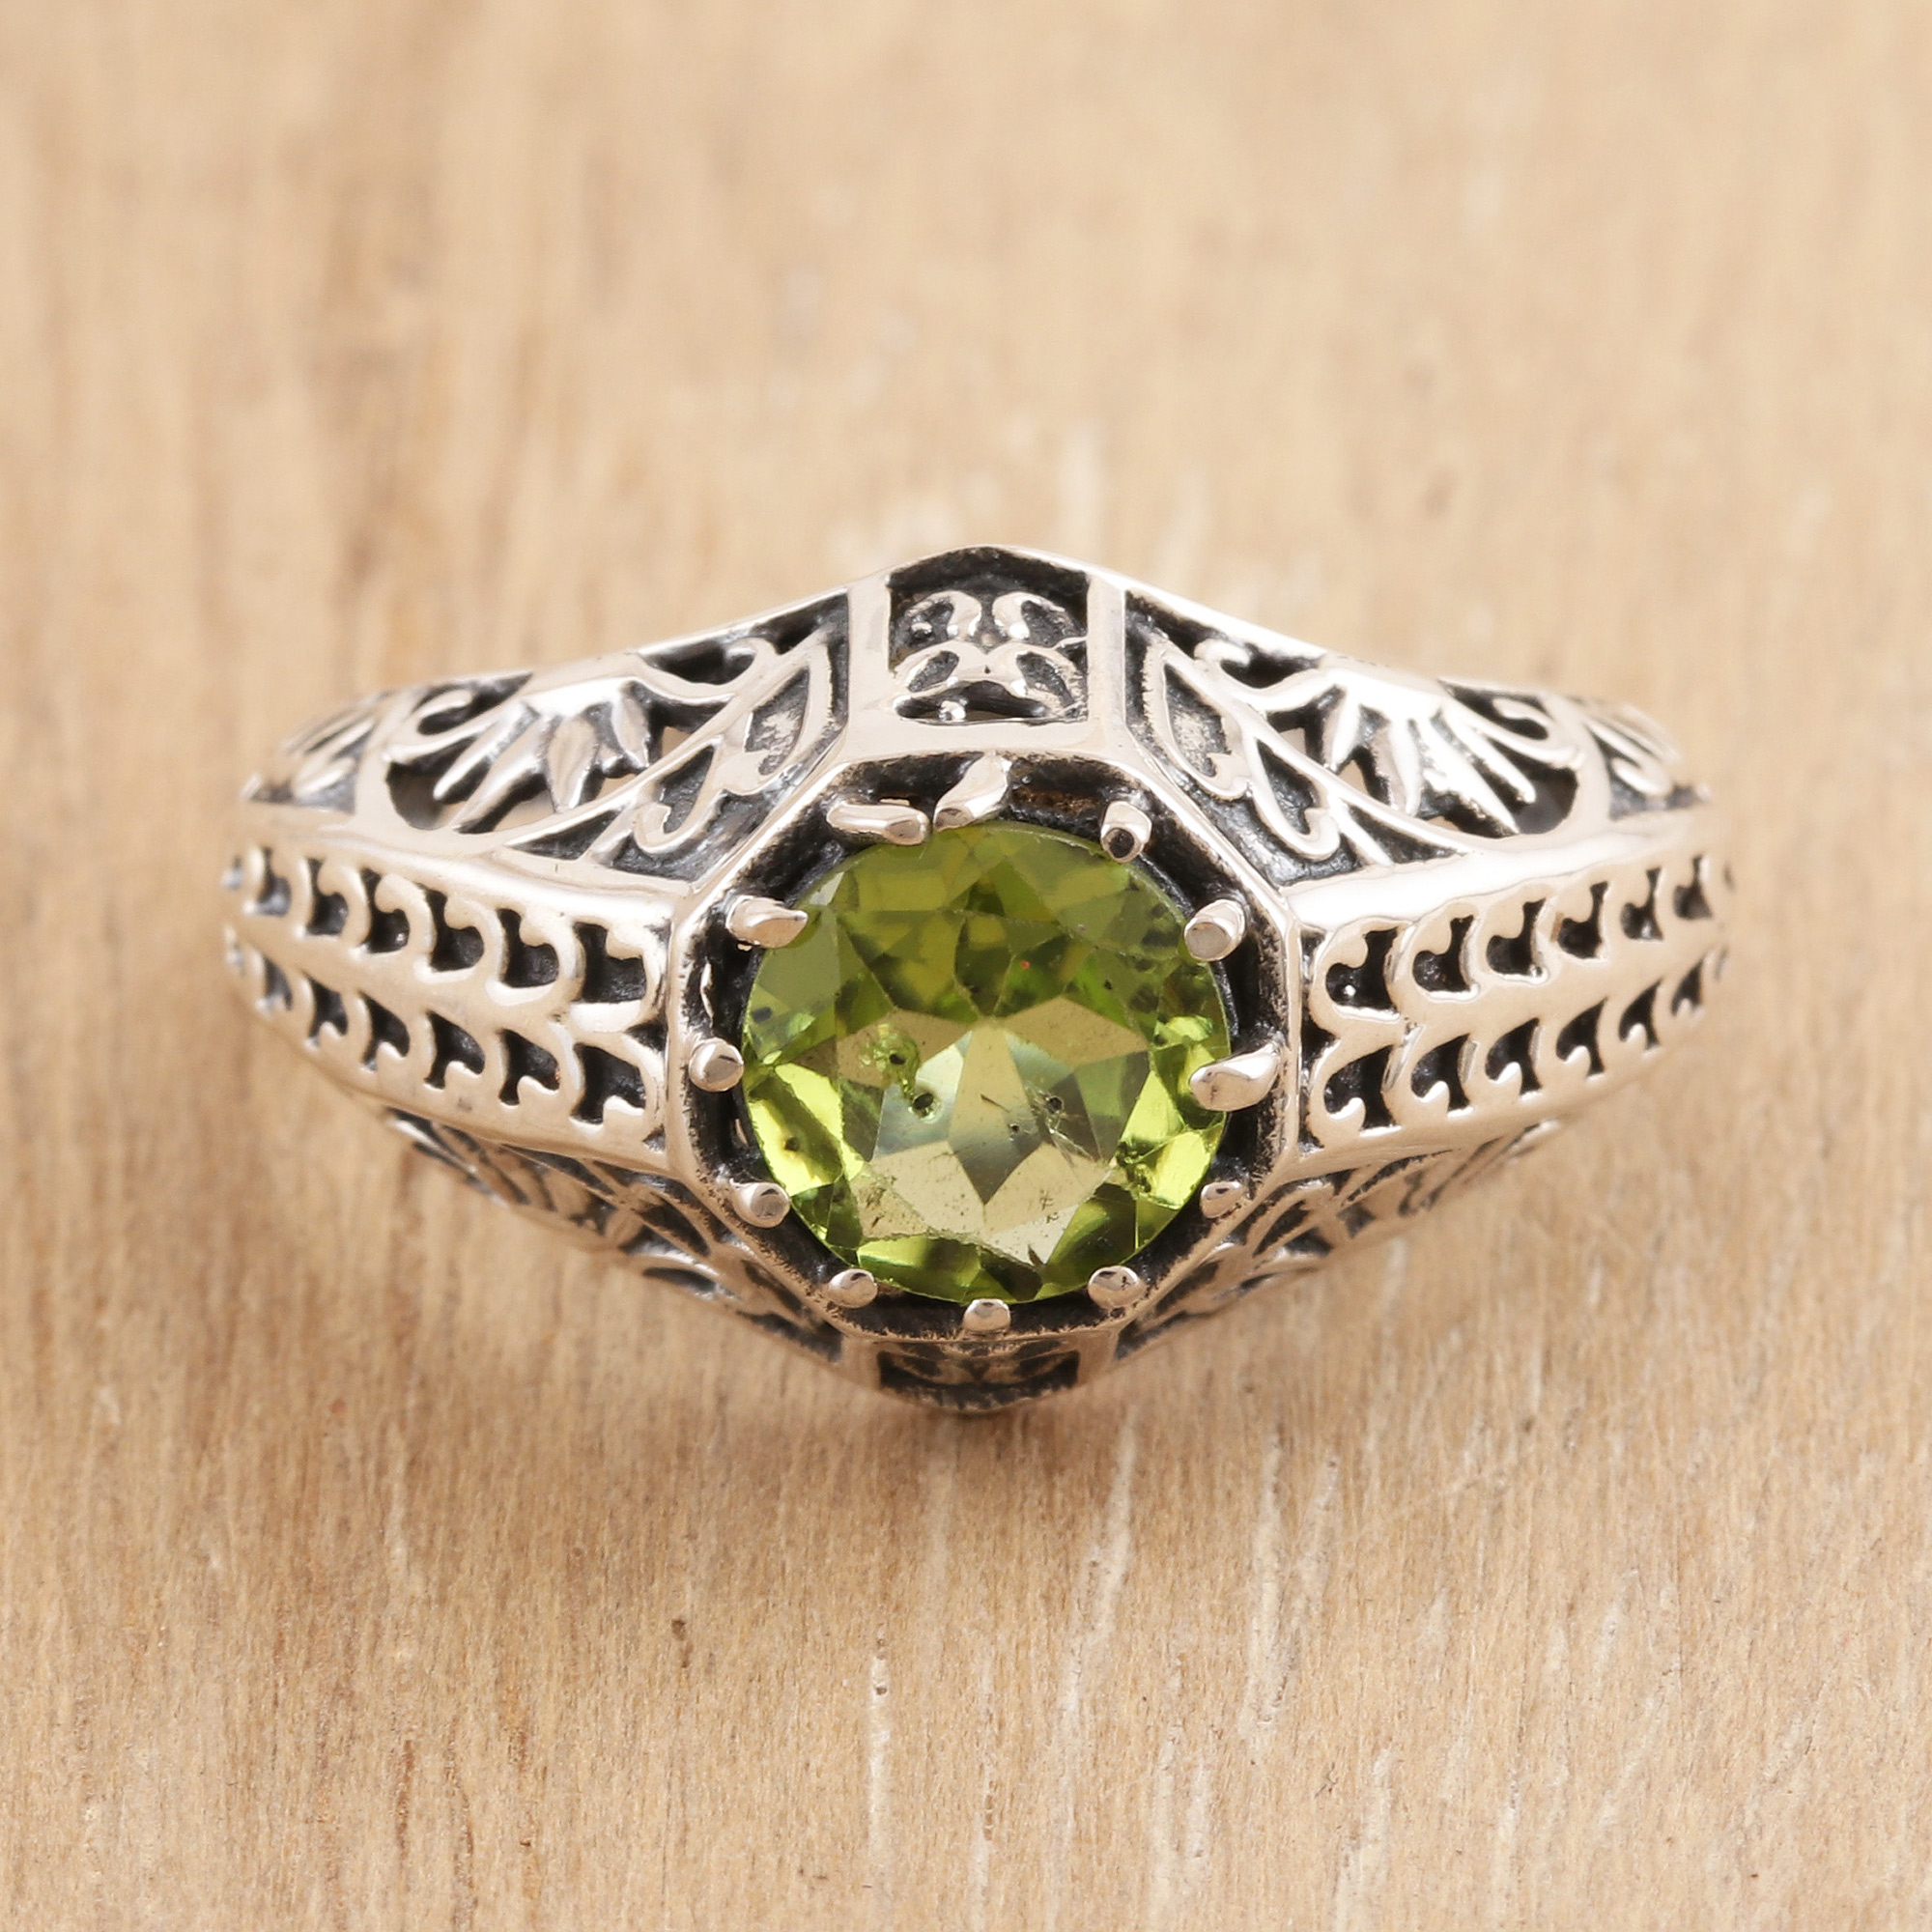 Handmade Sterling Silver Domed Ring with Faceted Peridot GreenEyed Glory NOVICA